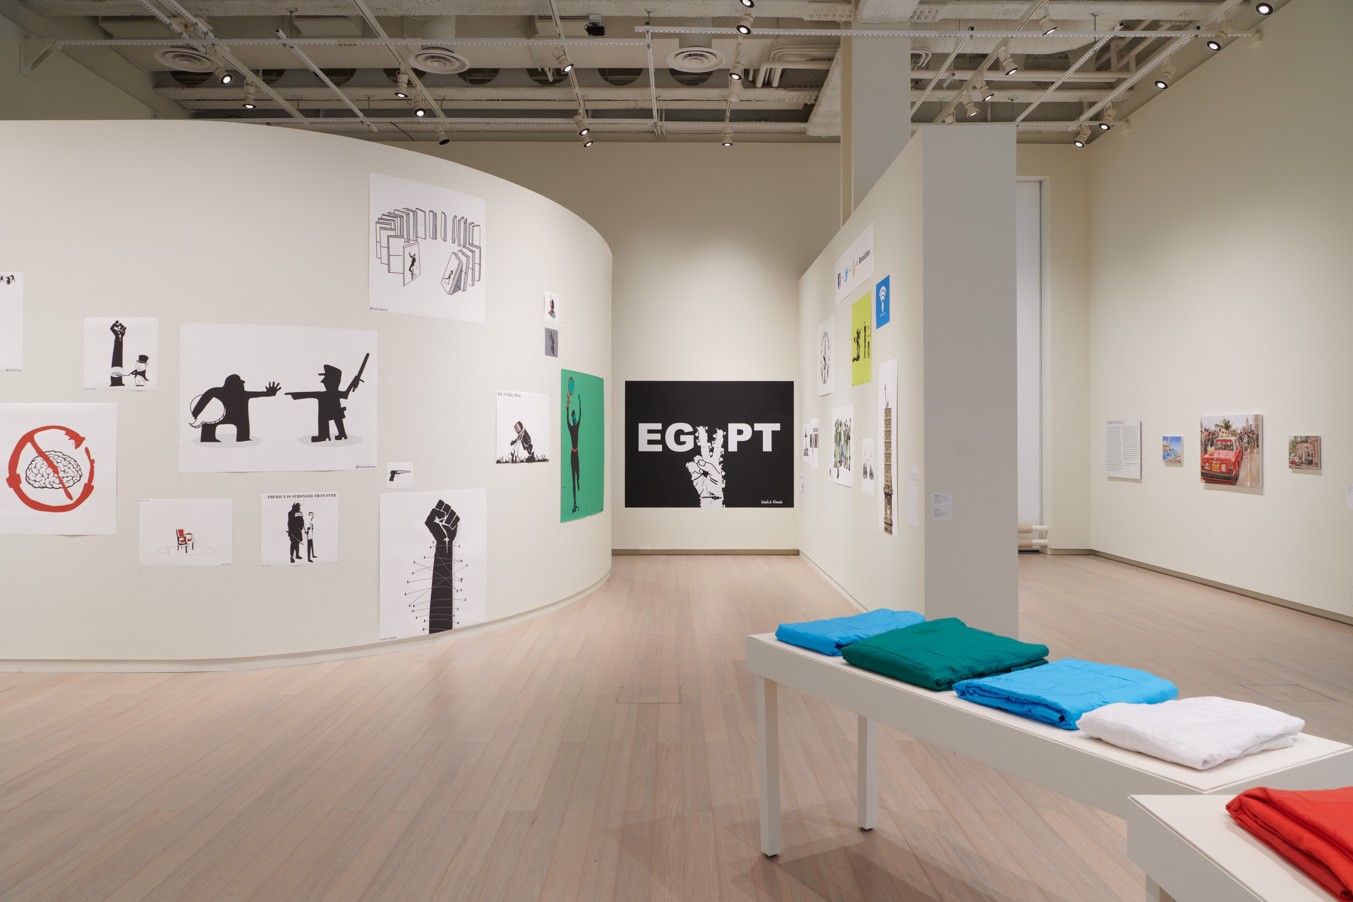 Installation view showing work by the artist Khalid Albaih from the exhibition “The Protest and The Recuperation” on view at the Wallach Art Gallery, Columbia University. Photograph by Kyle Knodell.